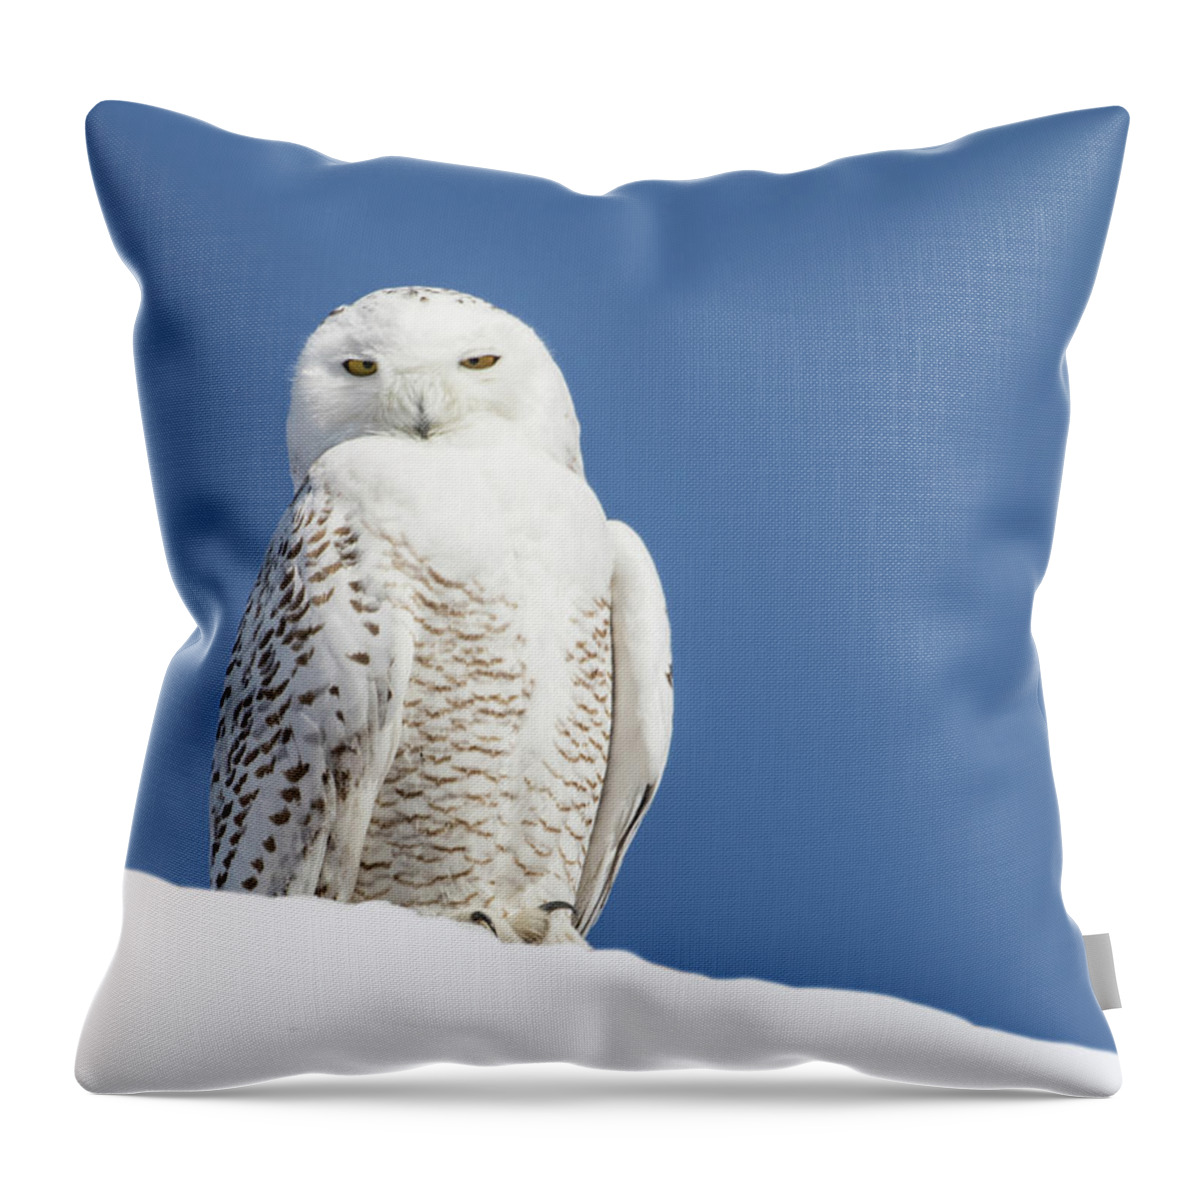 Snowy Owl Throw Pillow featuring the photograph Snowy Owl #1 by Mindy Musick King